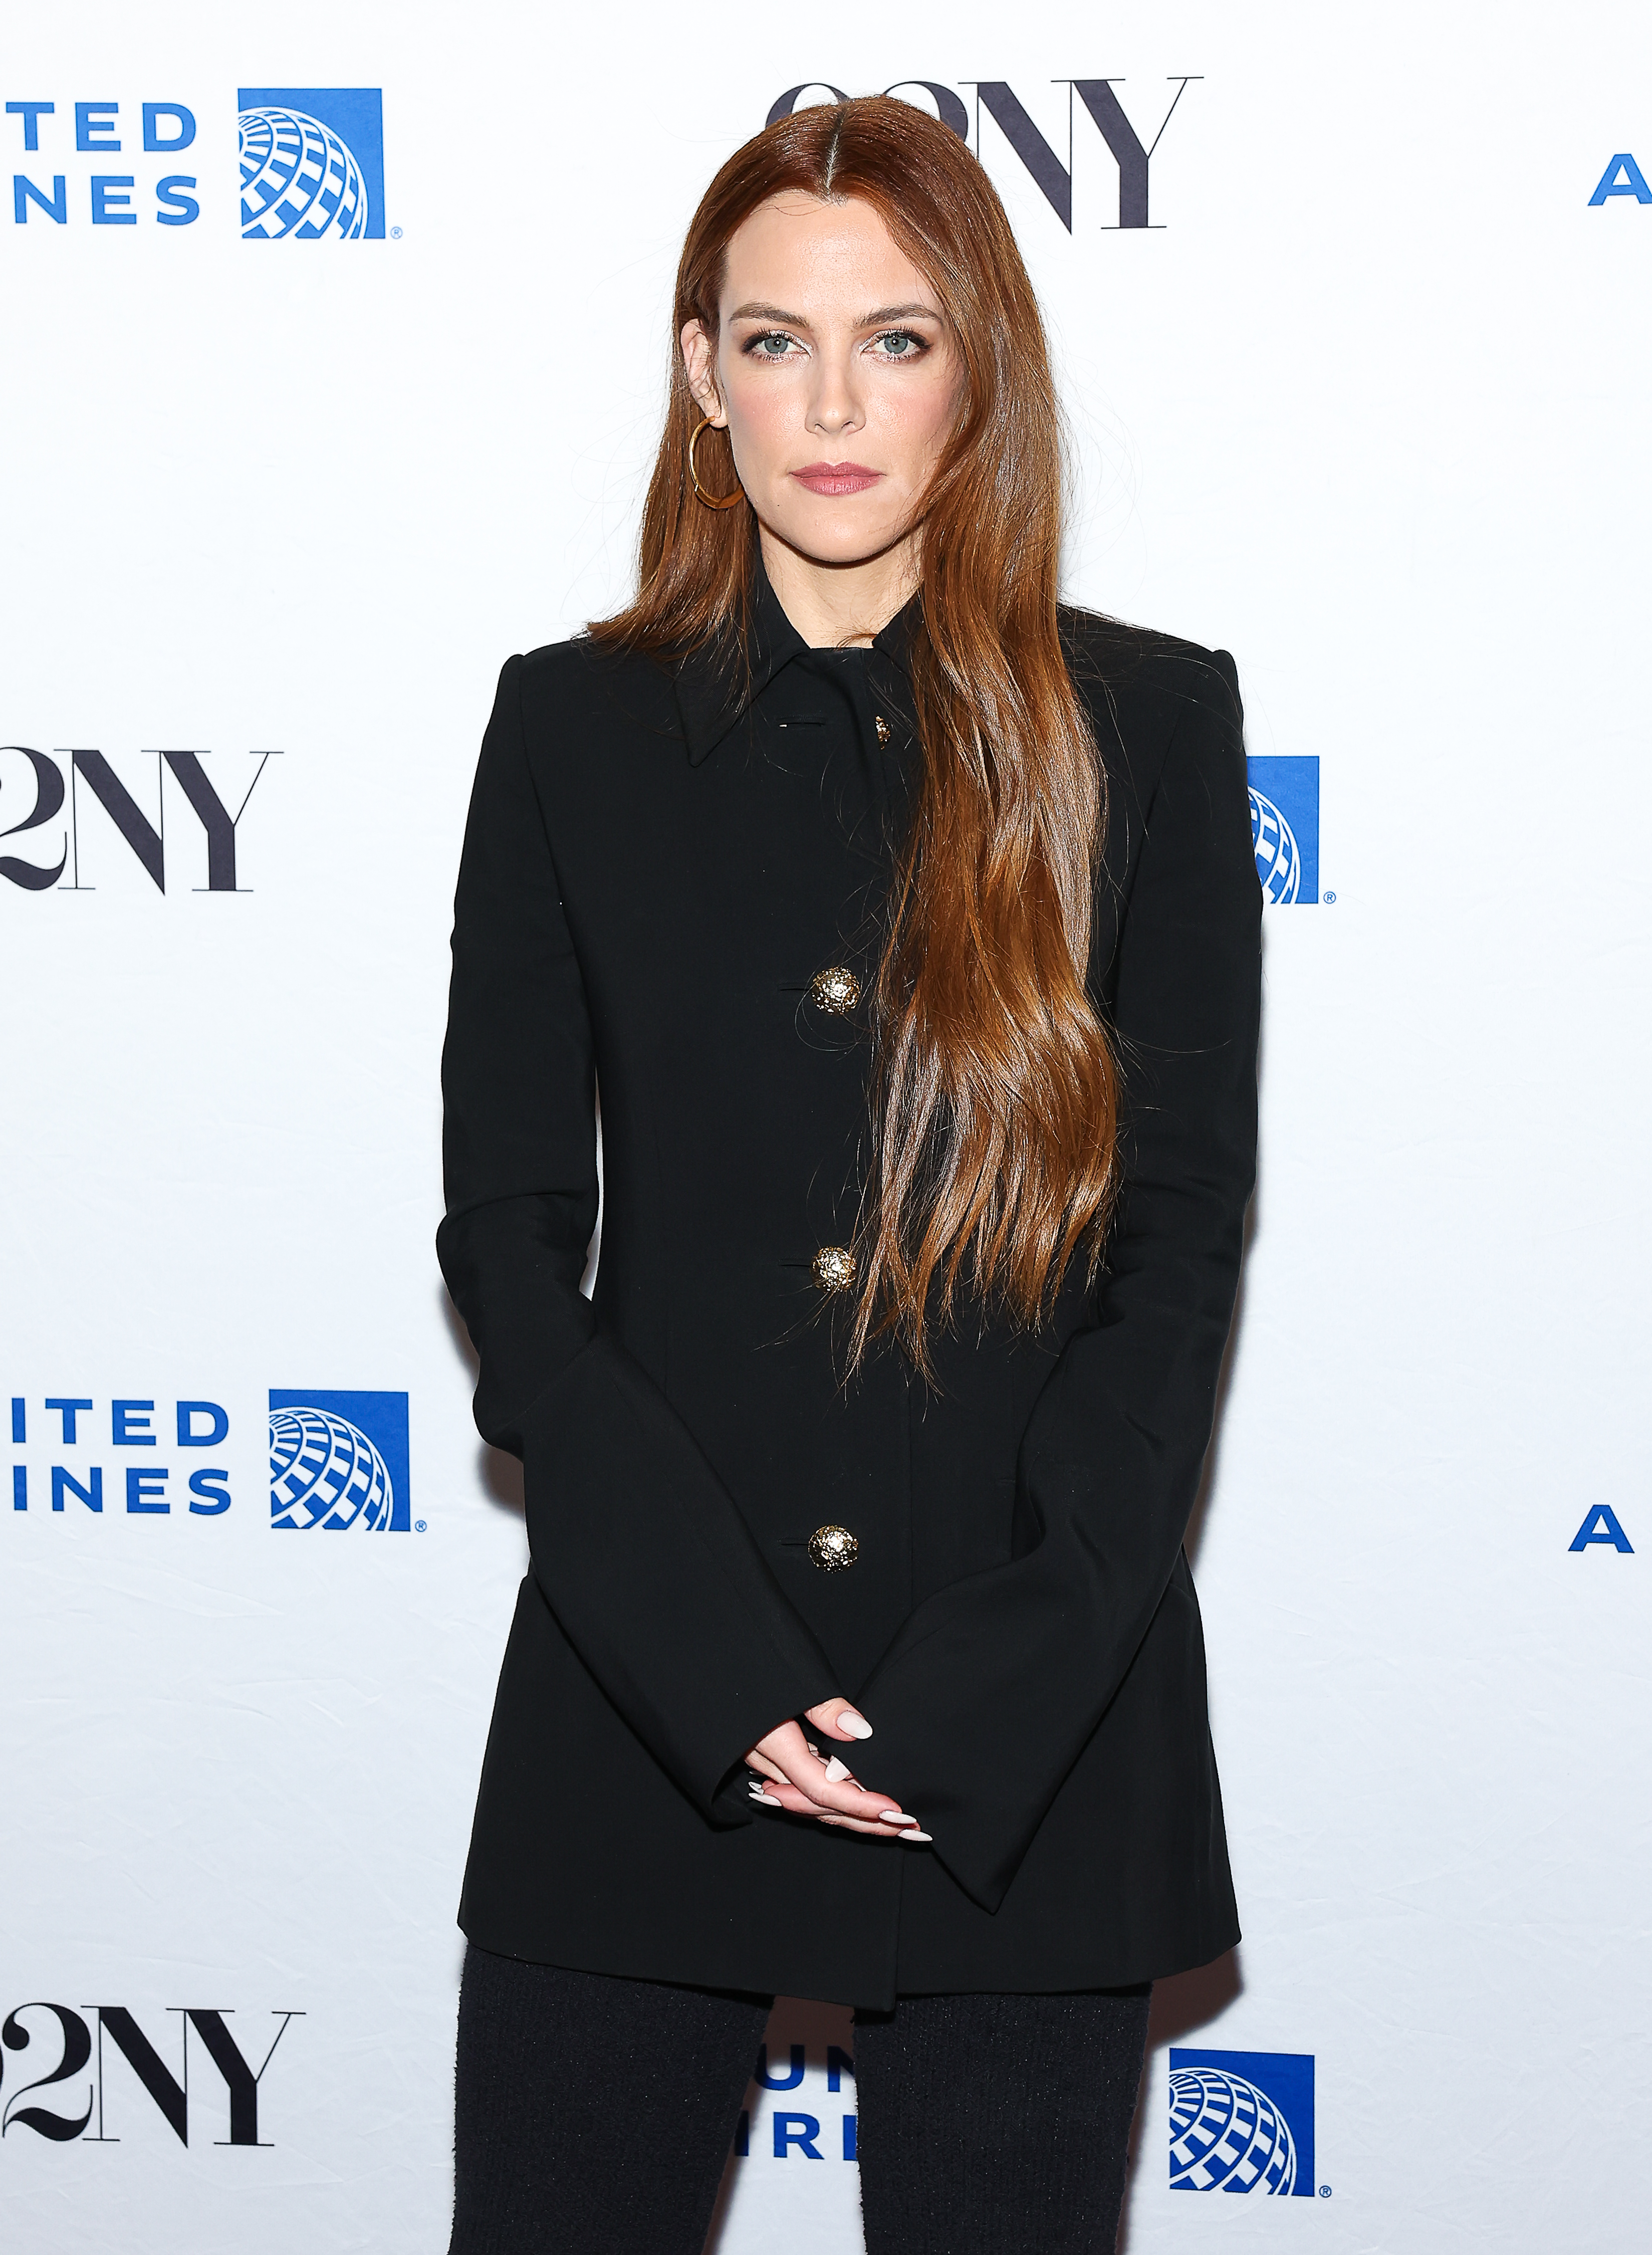 Riley Keough at The 92nd Street Y on February 27, 2023 in New York City | Source: Getty Images